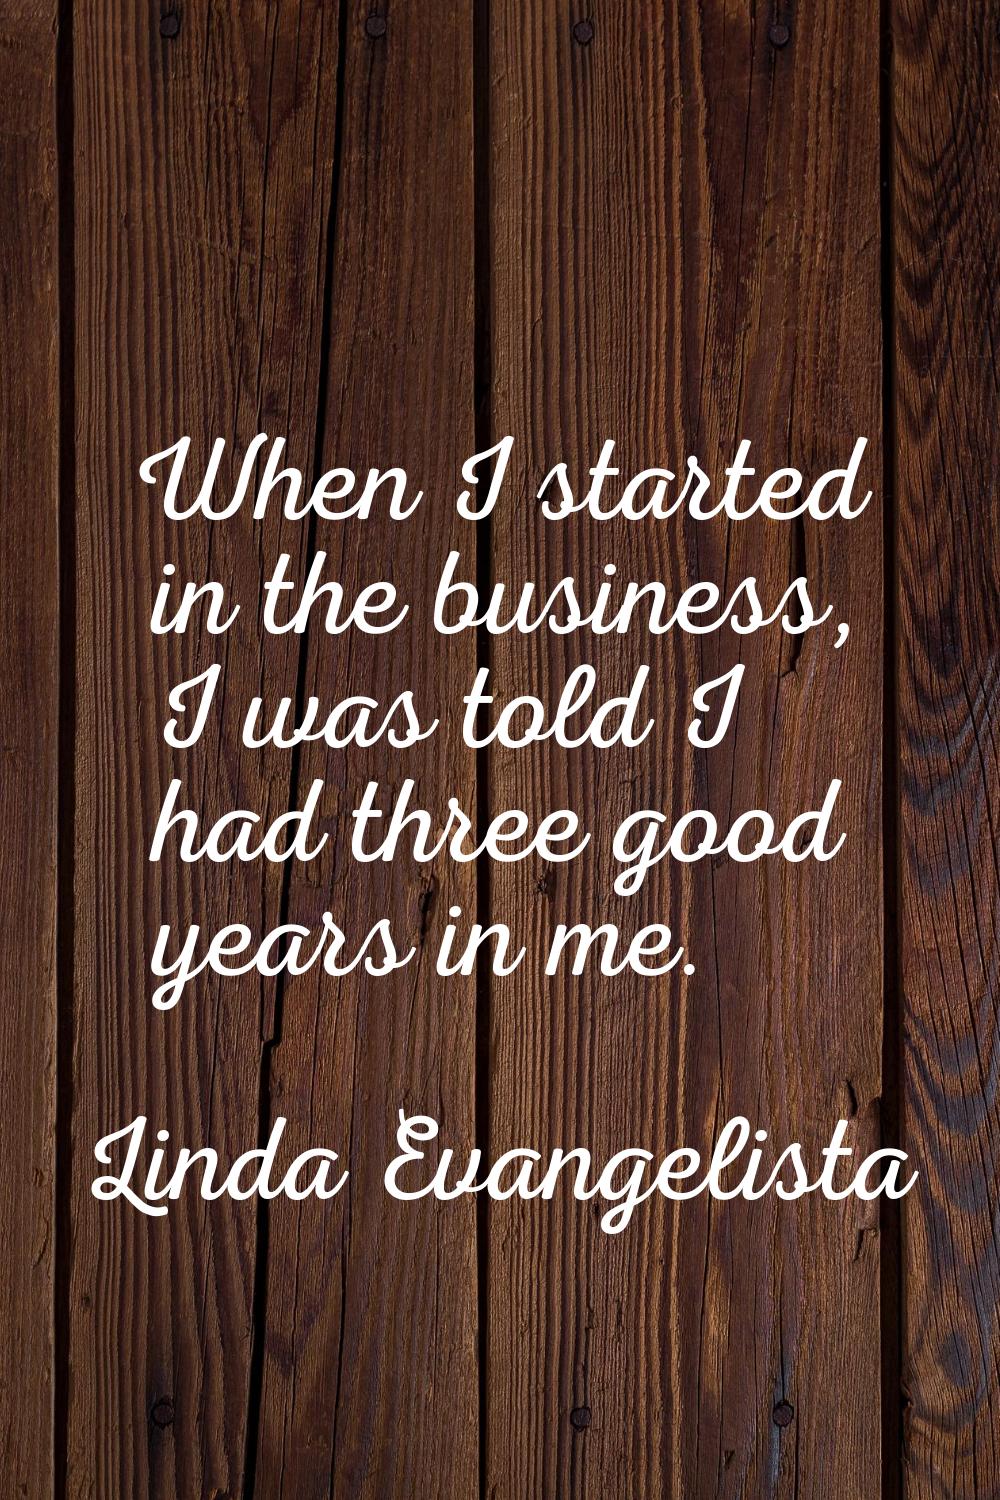 When I started in the business, I was told I had three good years in me.